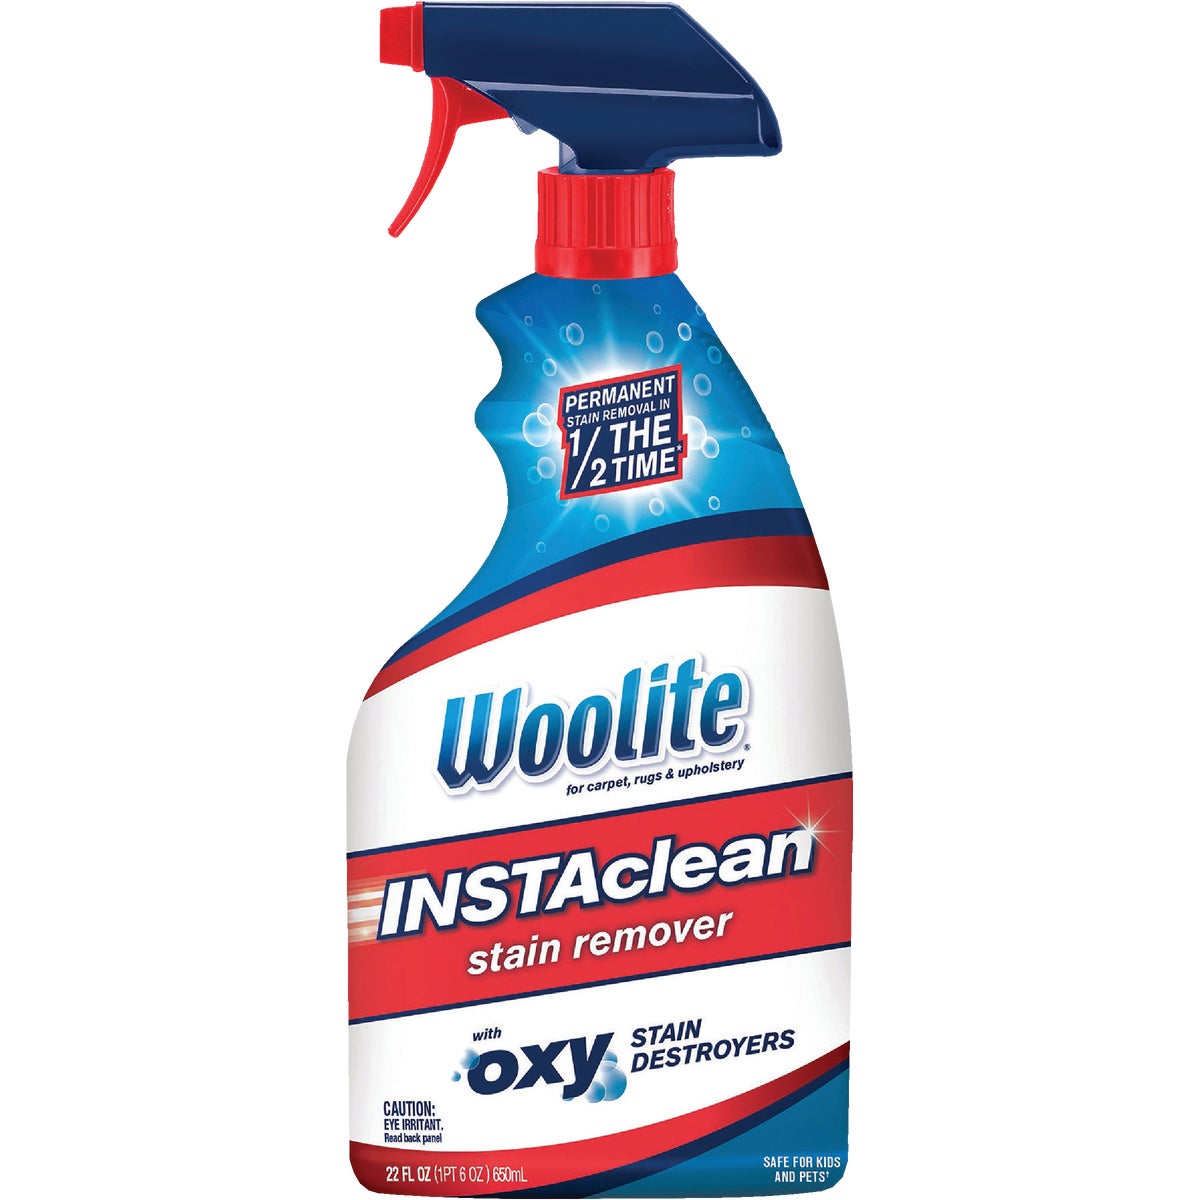 Item 624649, Woolite InstaClean Stain Remover with oxy stain destroyers will remove 